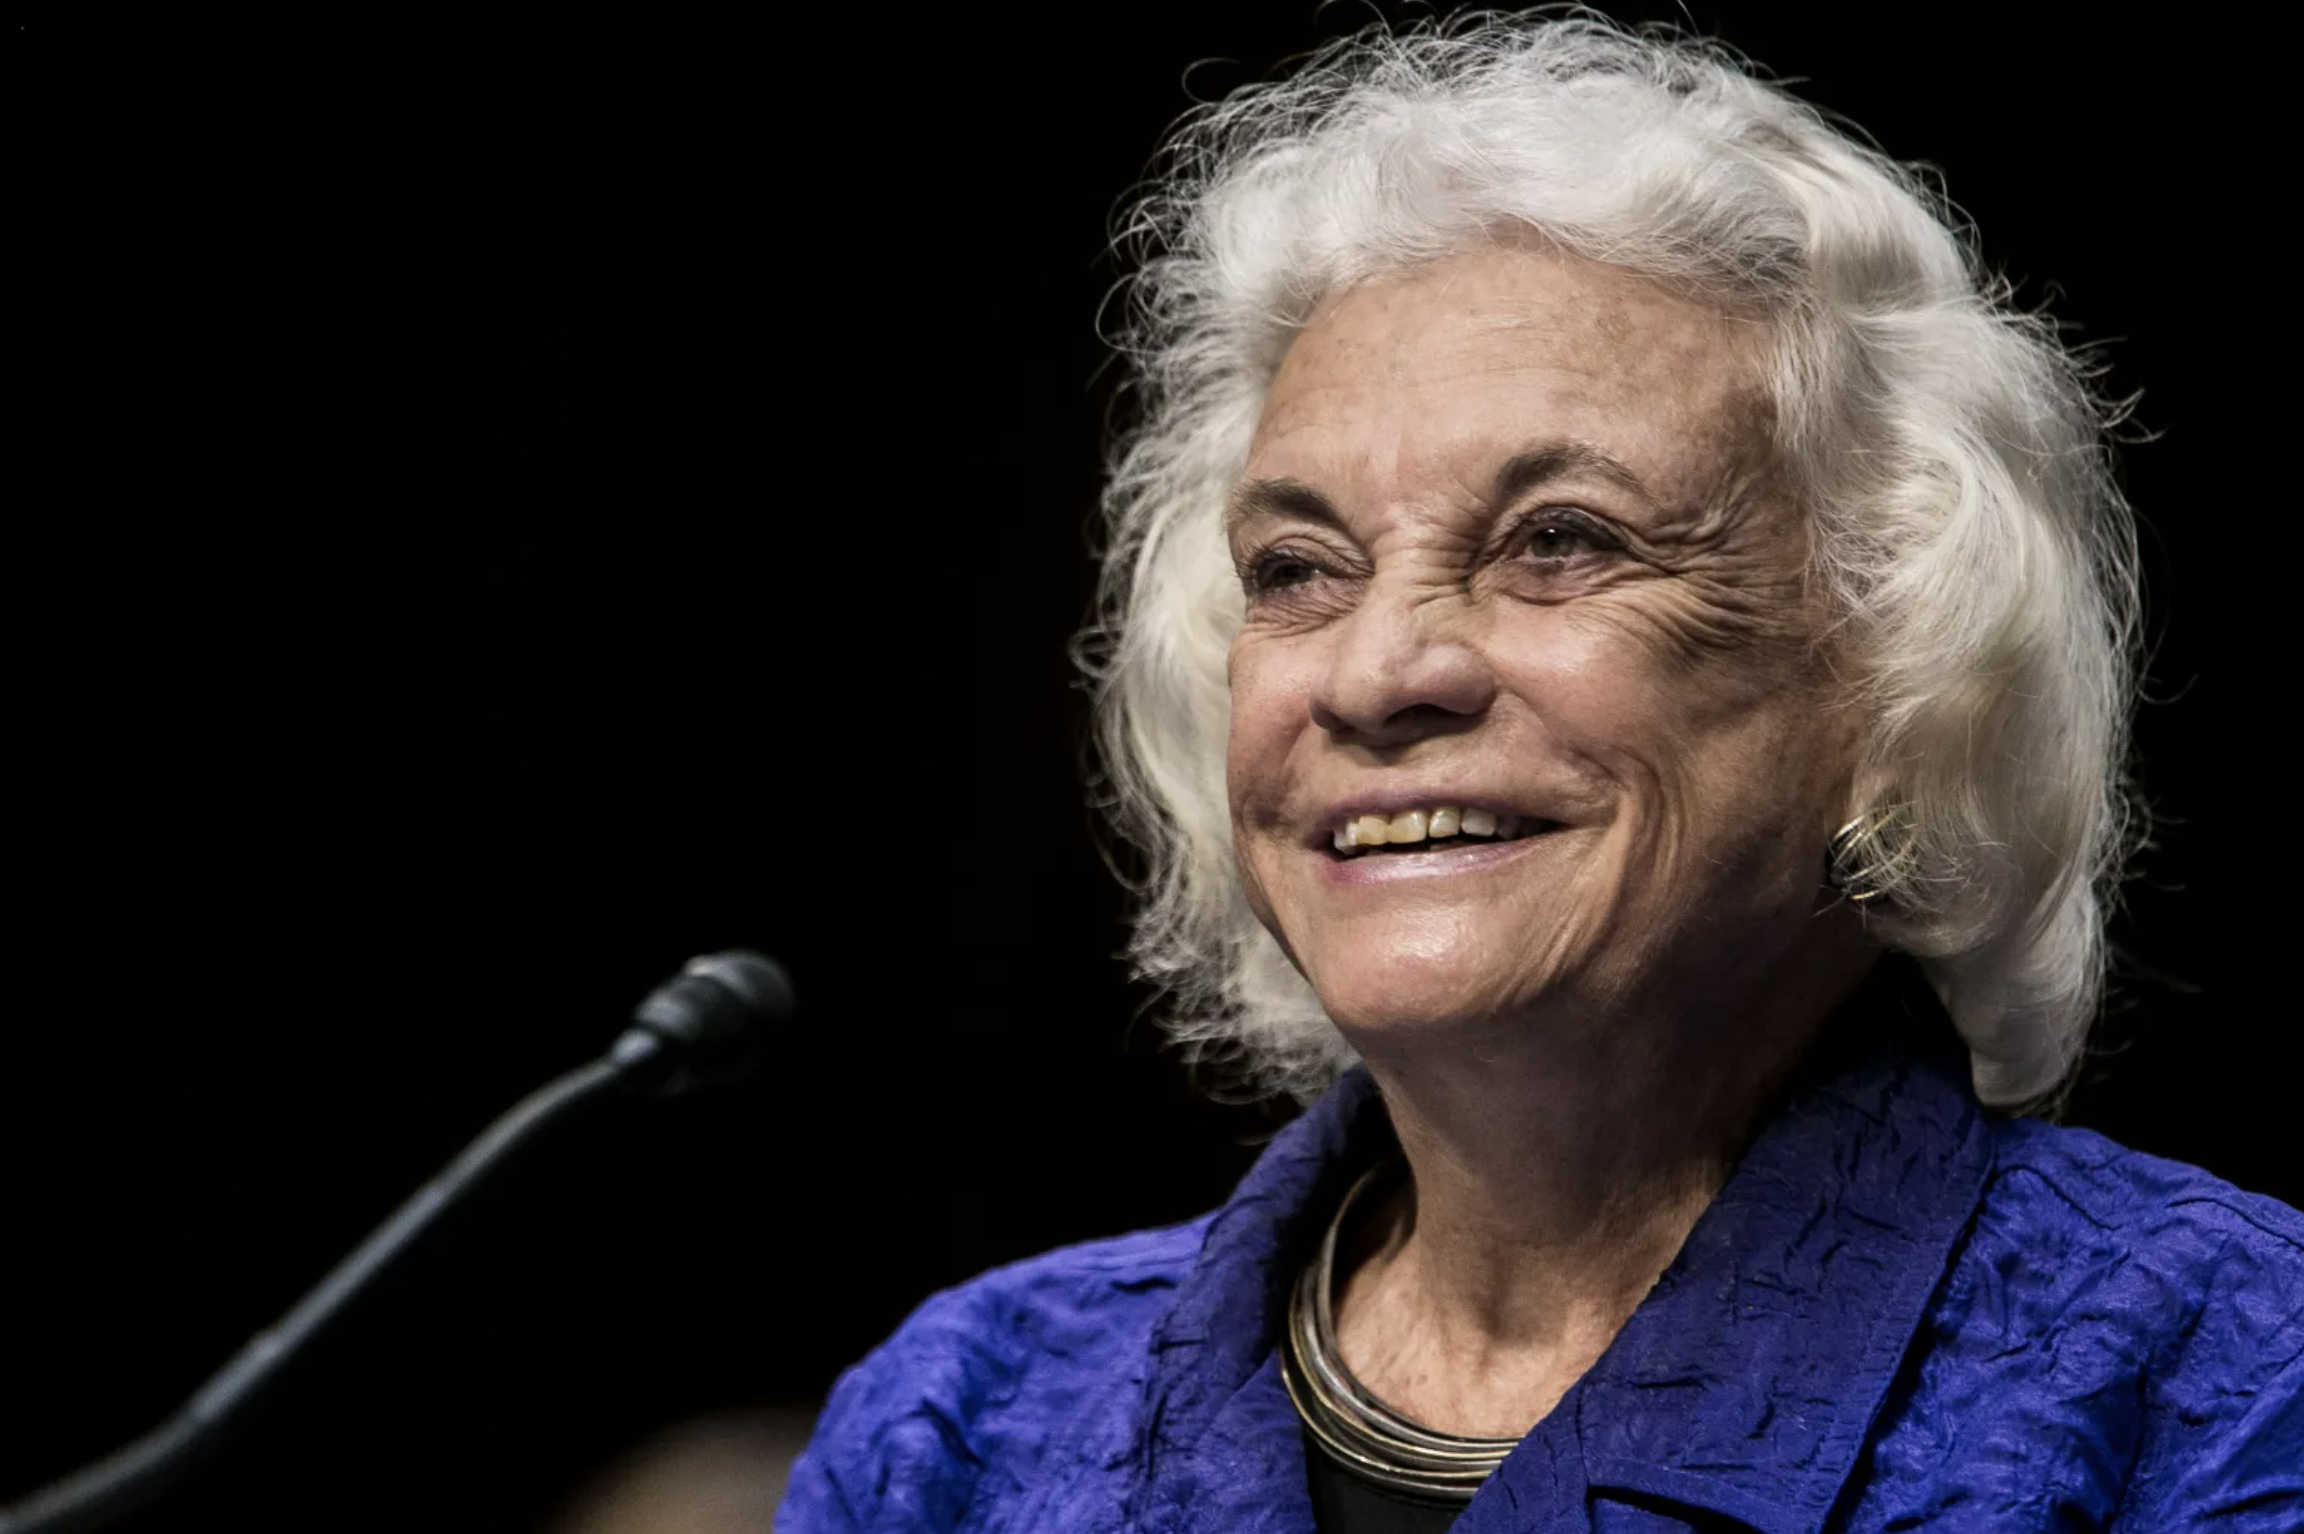 Sandra Day O’Connor, a former Supreme Court Justice, has died at the age of 93.